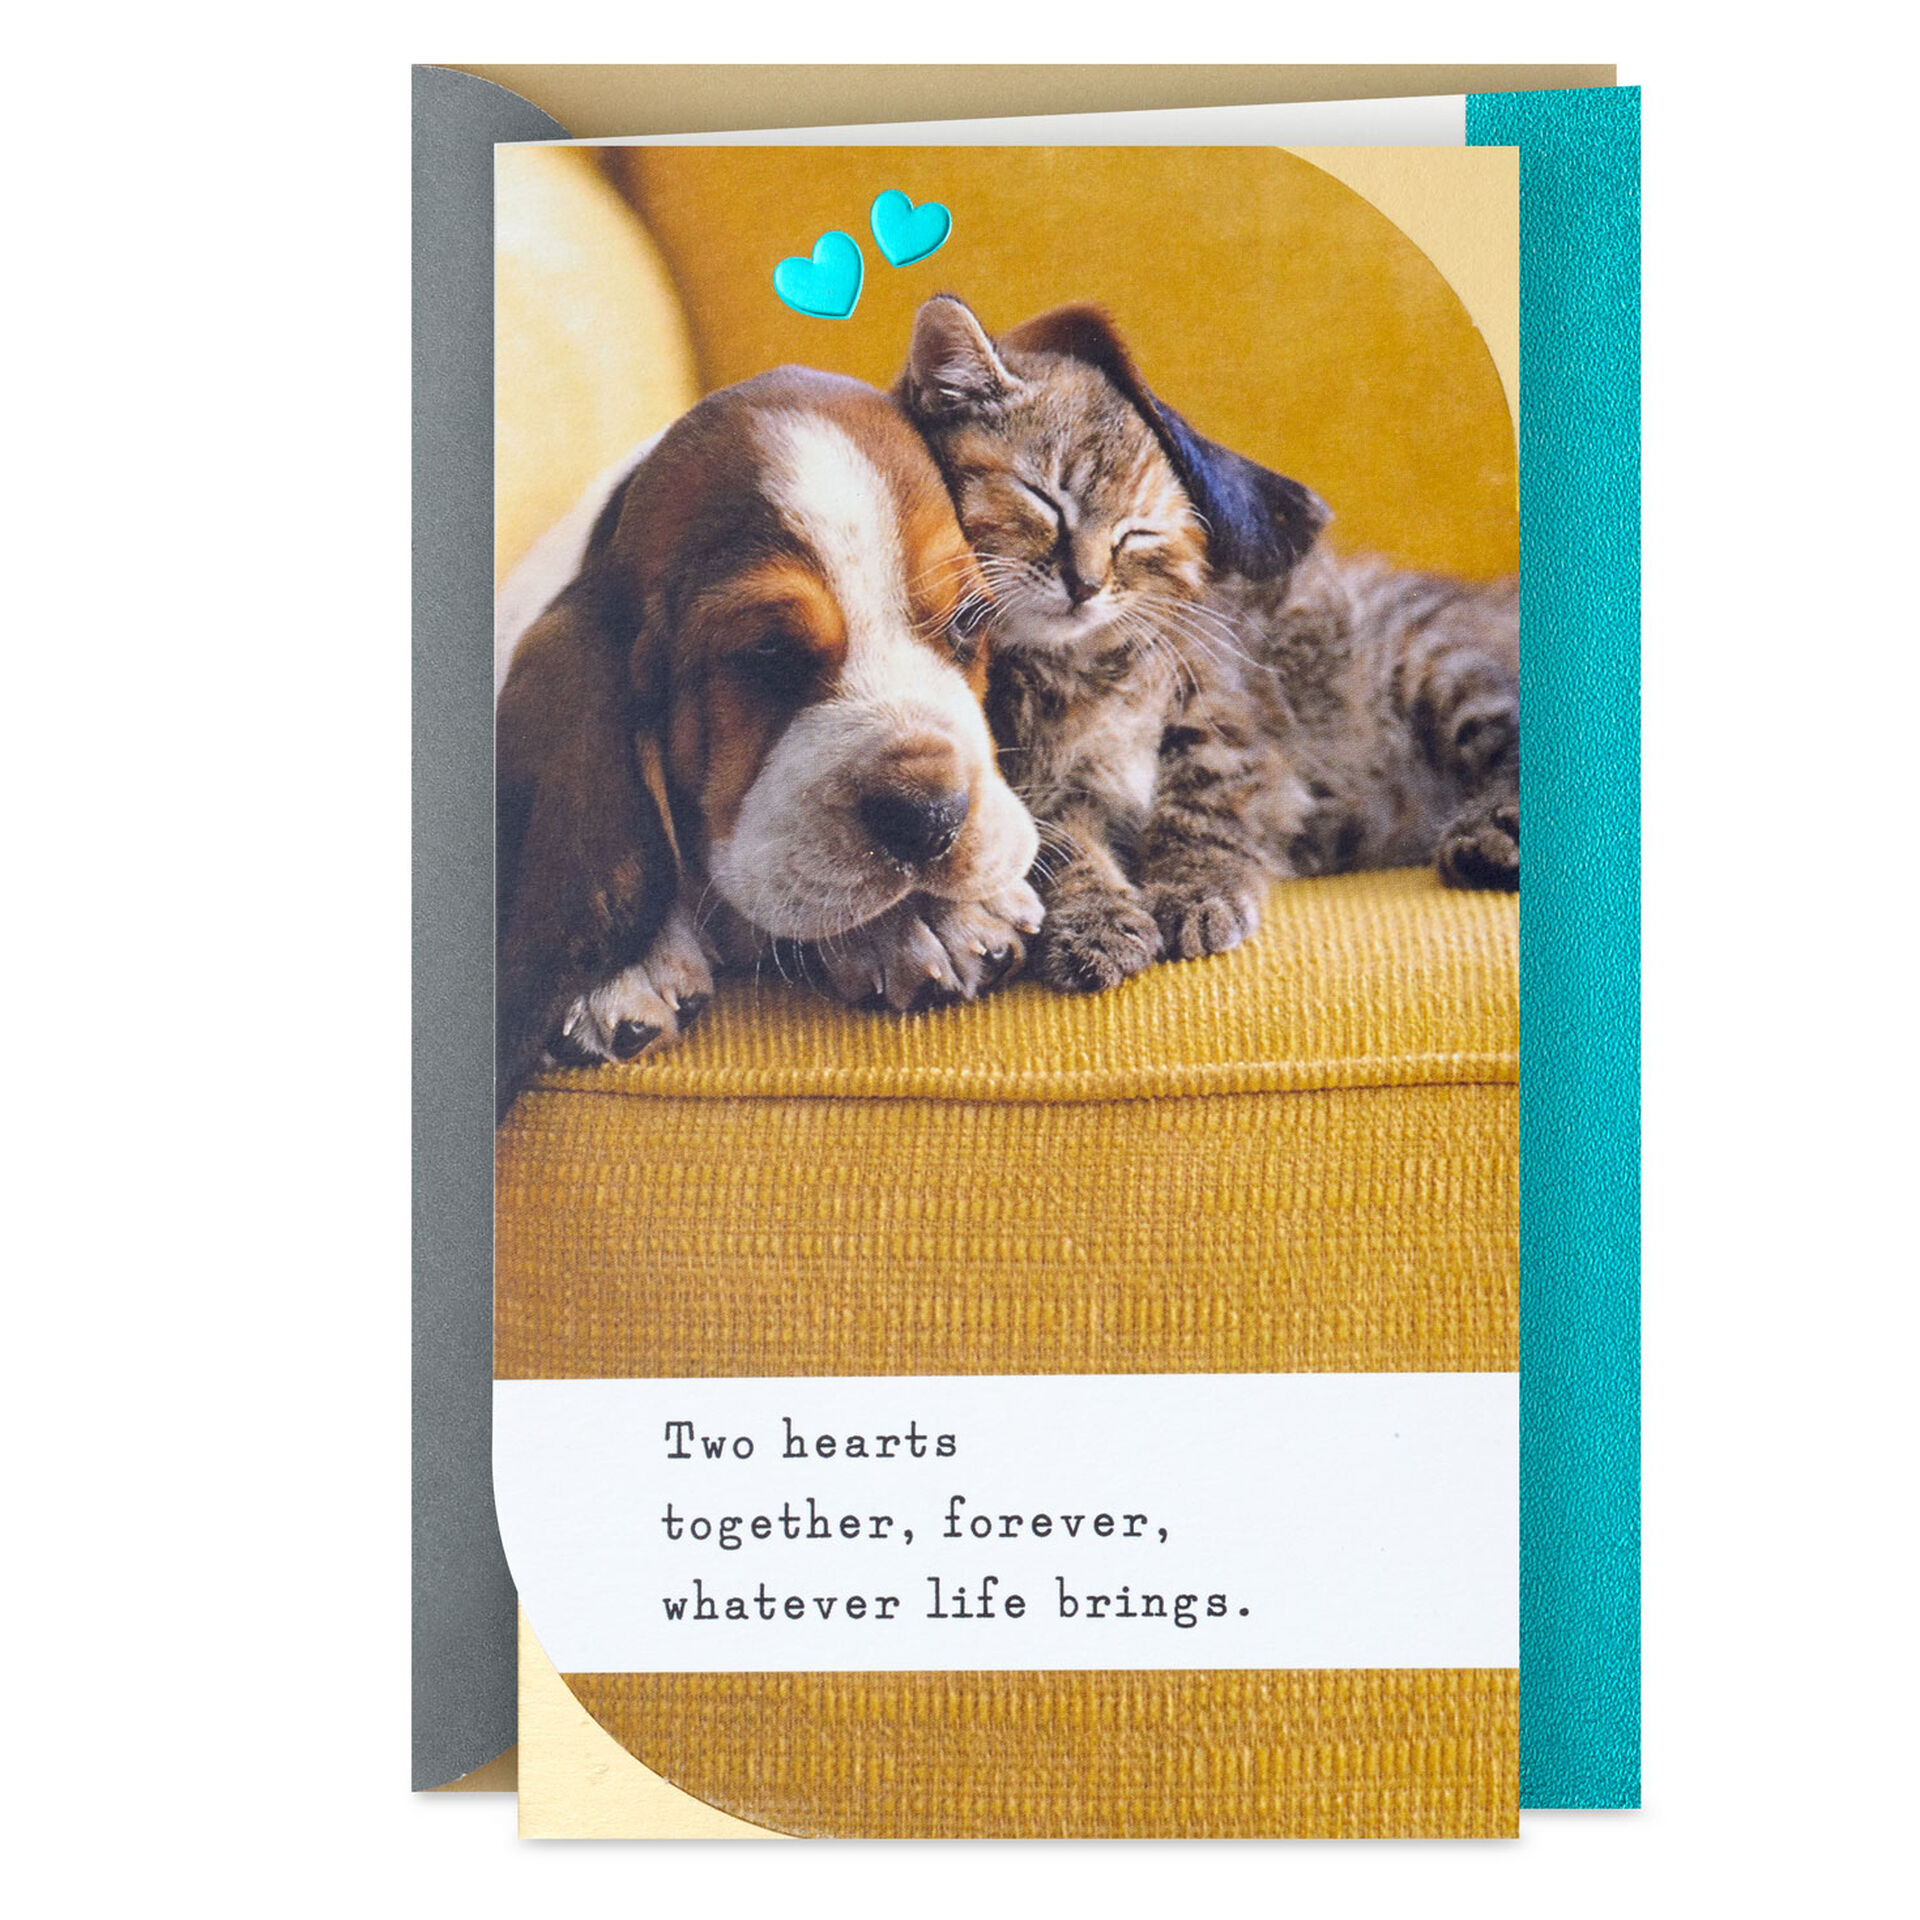 Puppy-&-Kitten-Snuggling-on-Chair-Anniversary-Card_399AVY3195_01